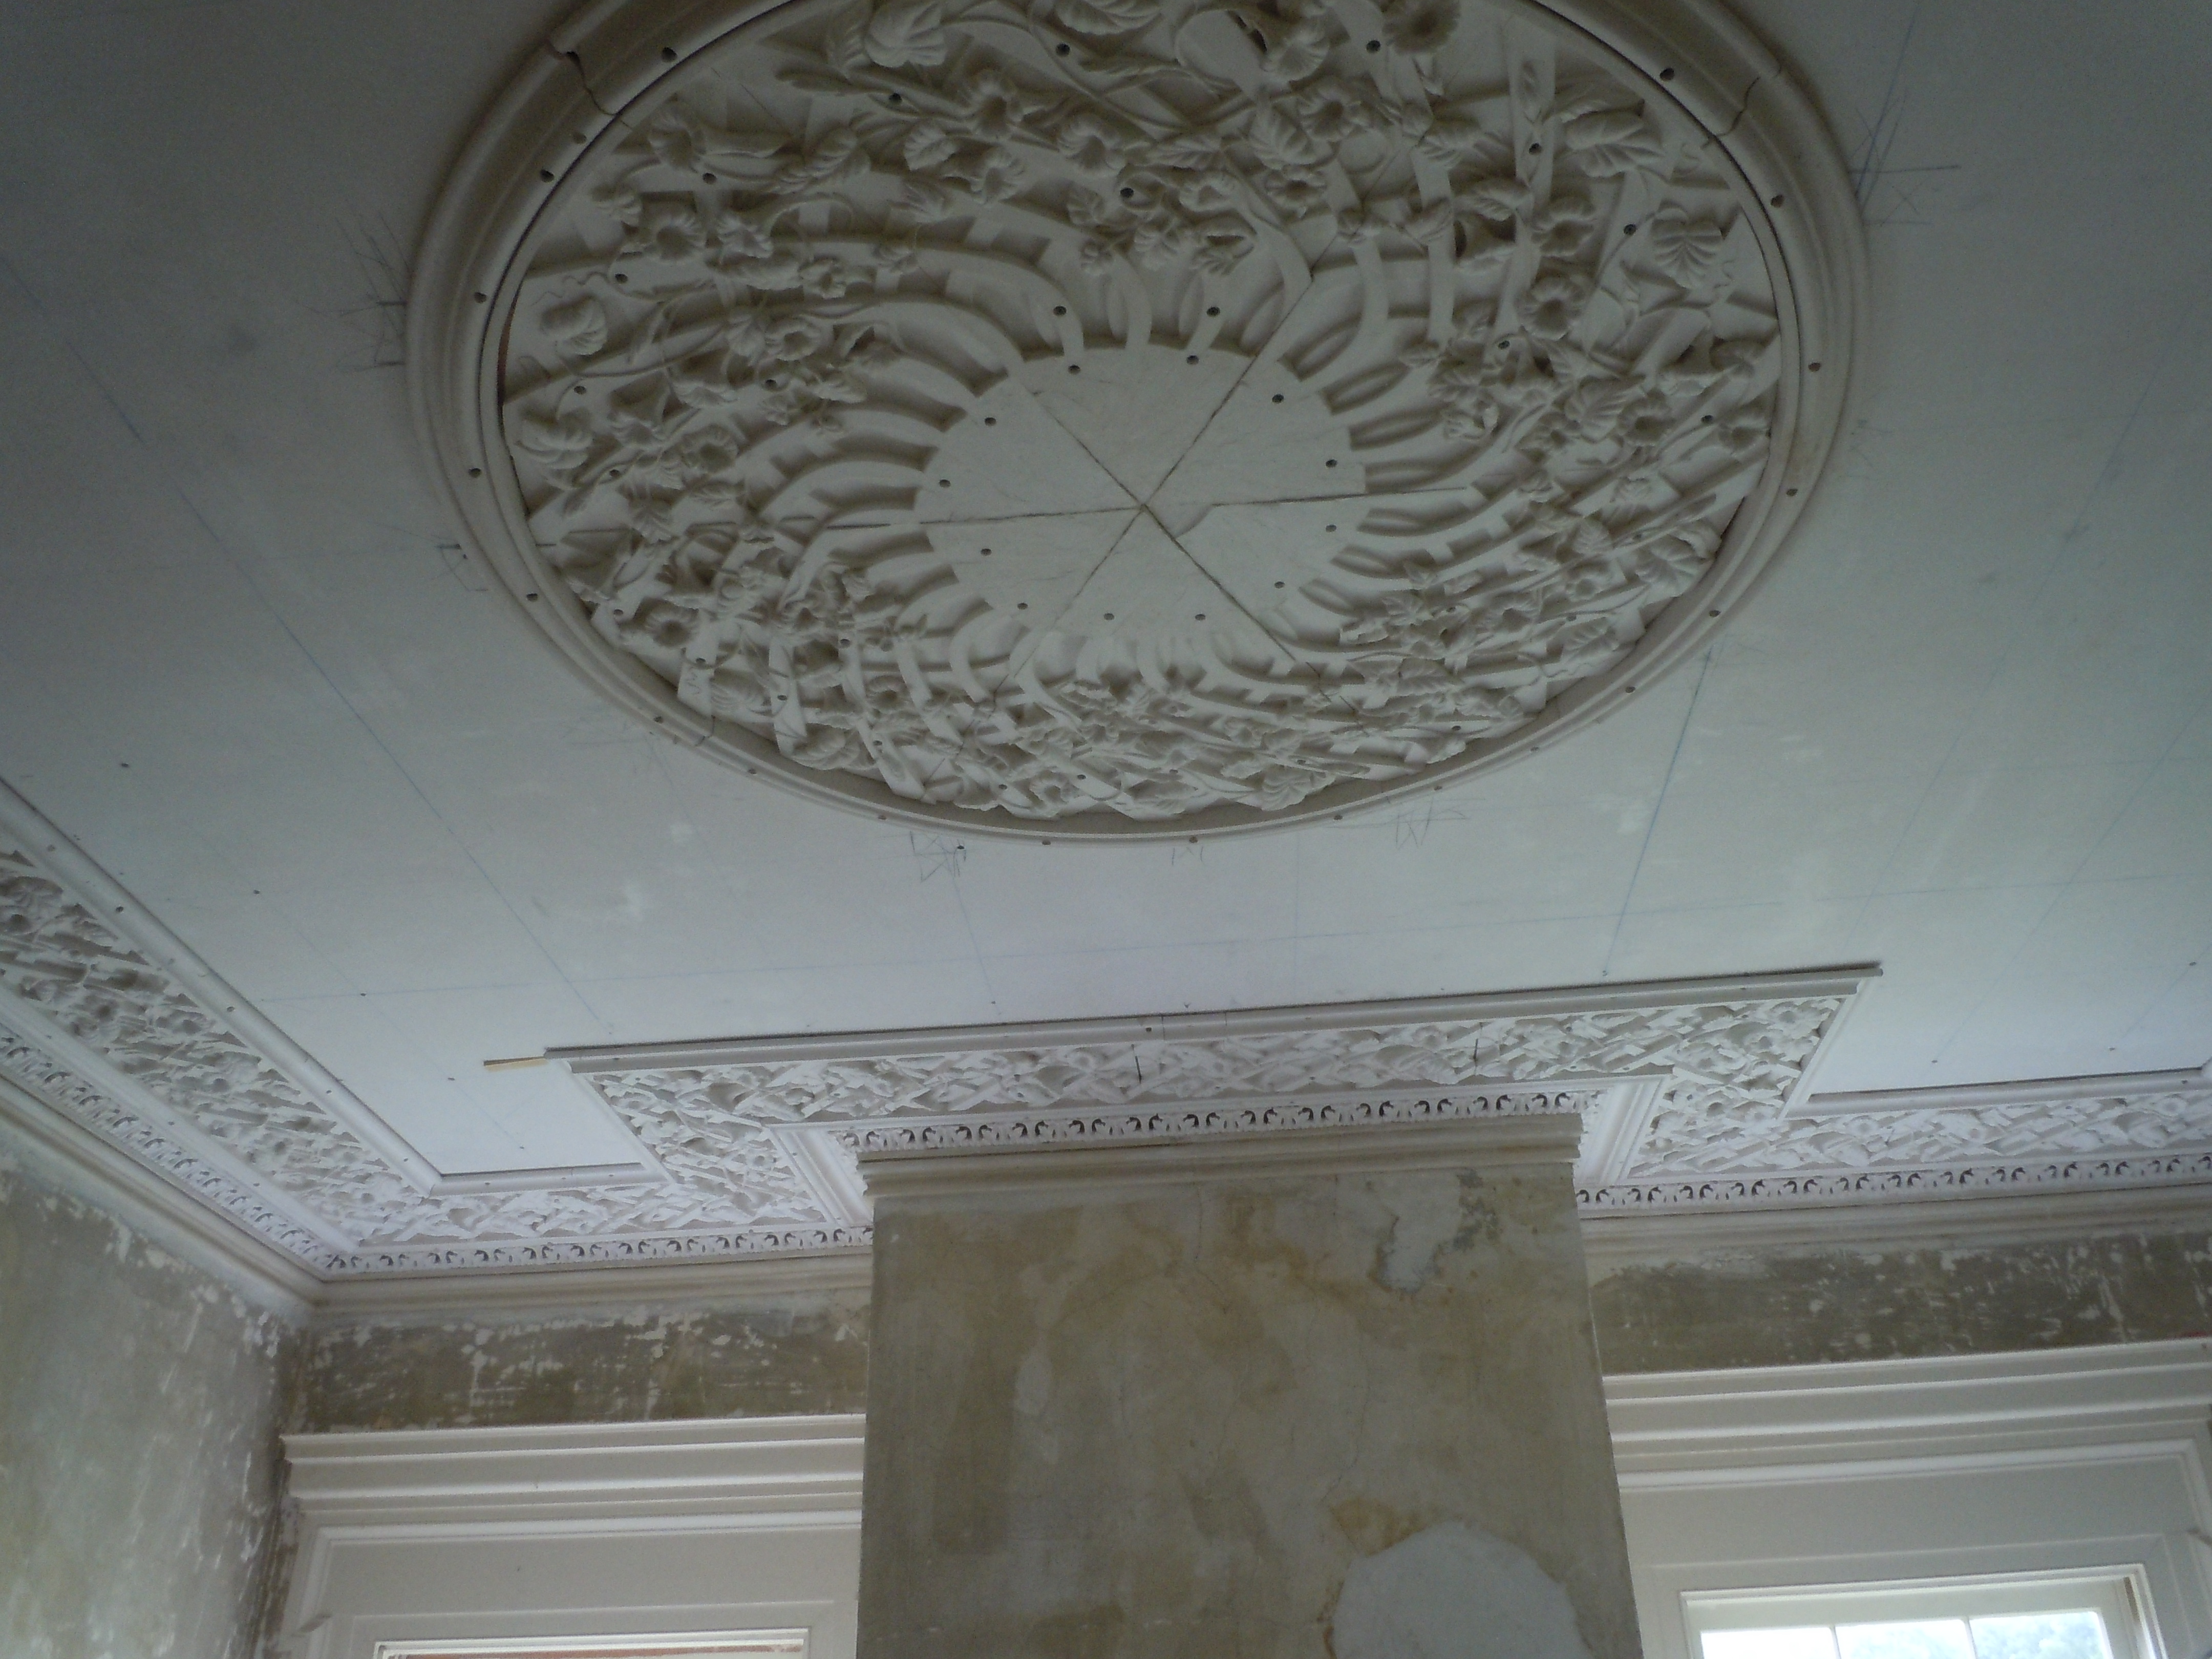  Lattice perimeter and partially installed center medallion in the front room.